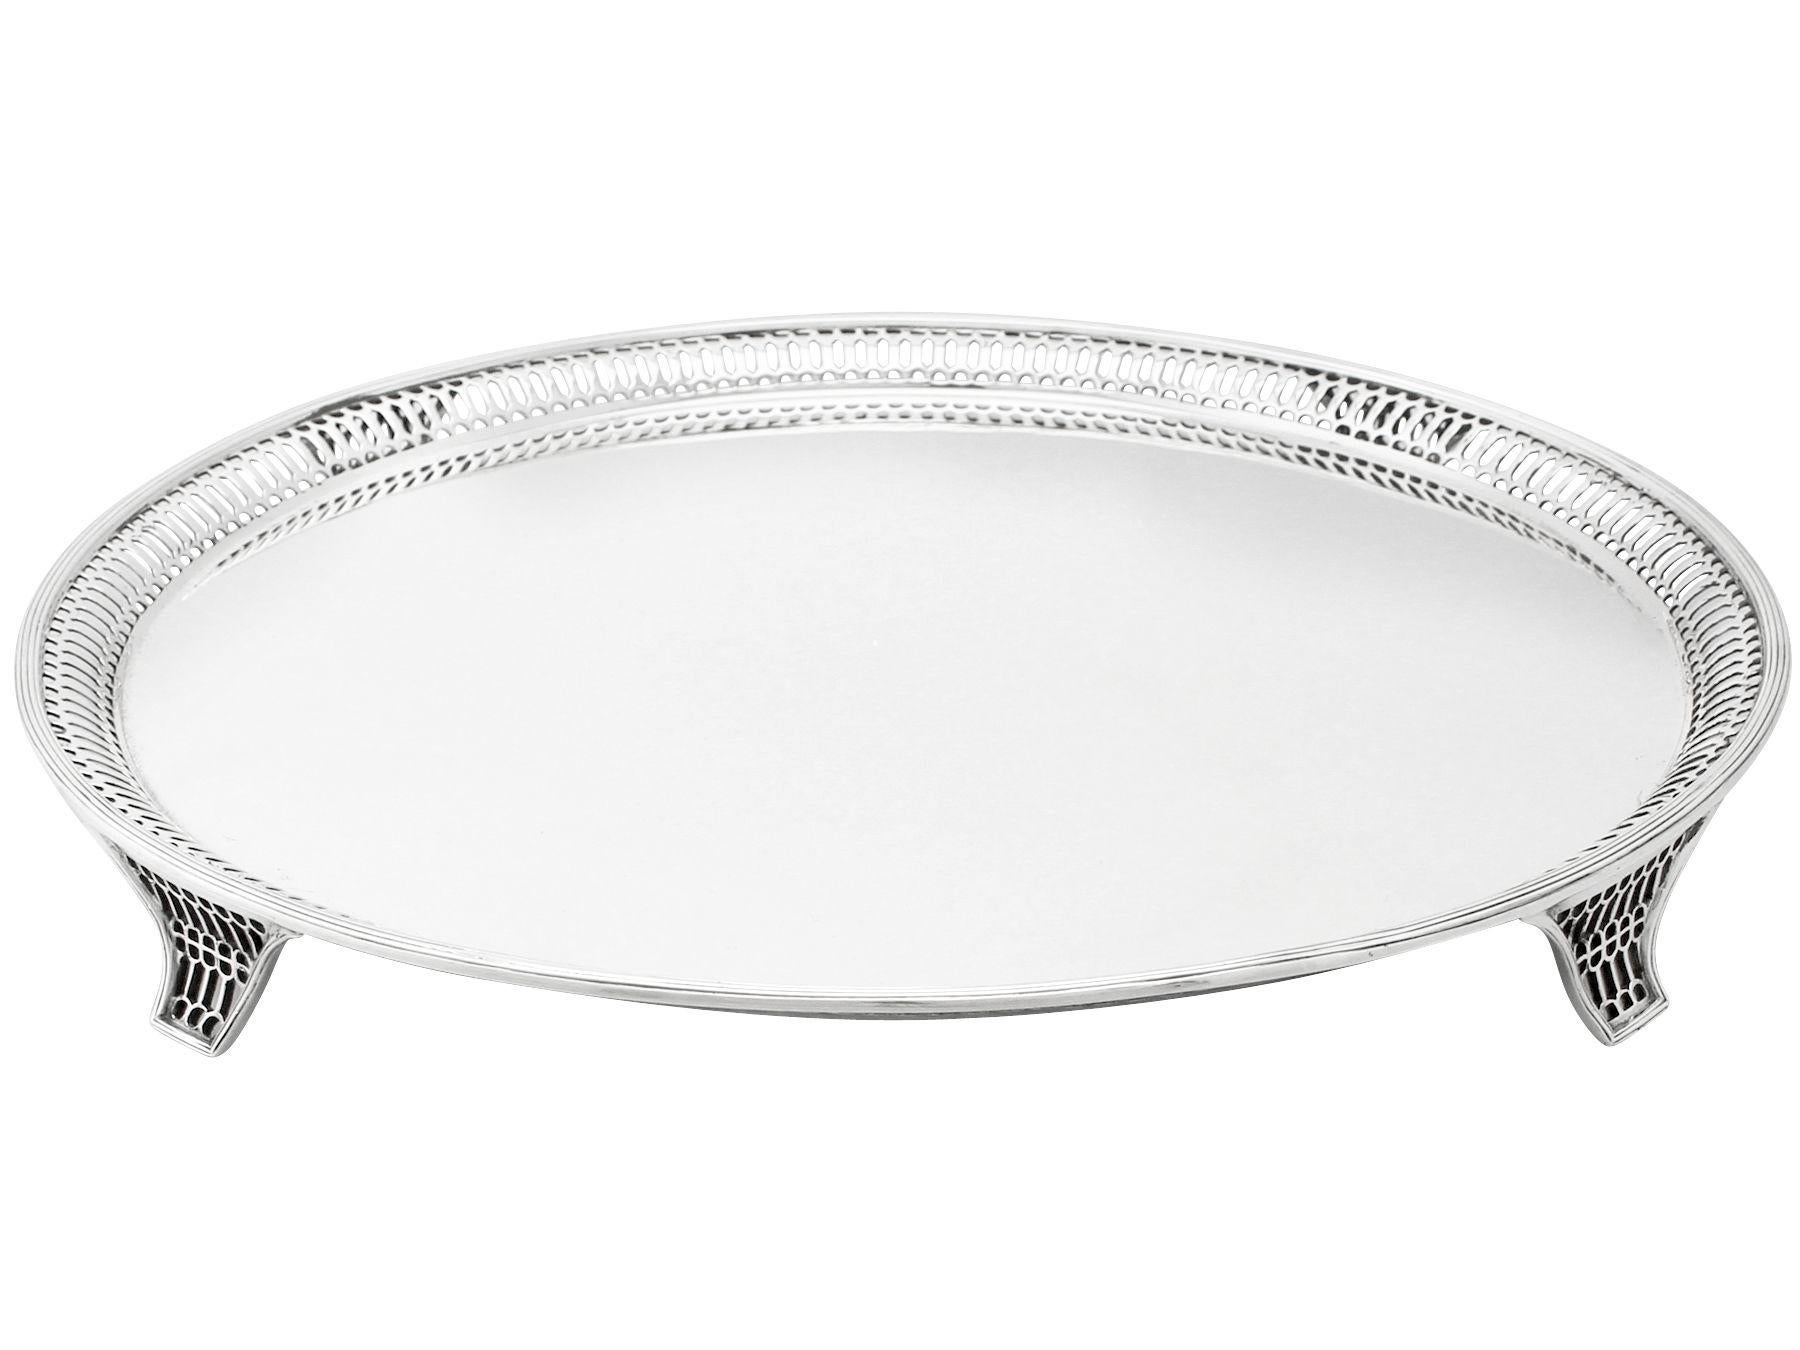 An exceptional, fine and impressive, antique George V English sterling silver salver; part of our dining silverware collection.

This exceptional antique sterling silver salver has a plain circular form.

The surface of this George V salver is